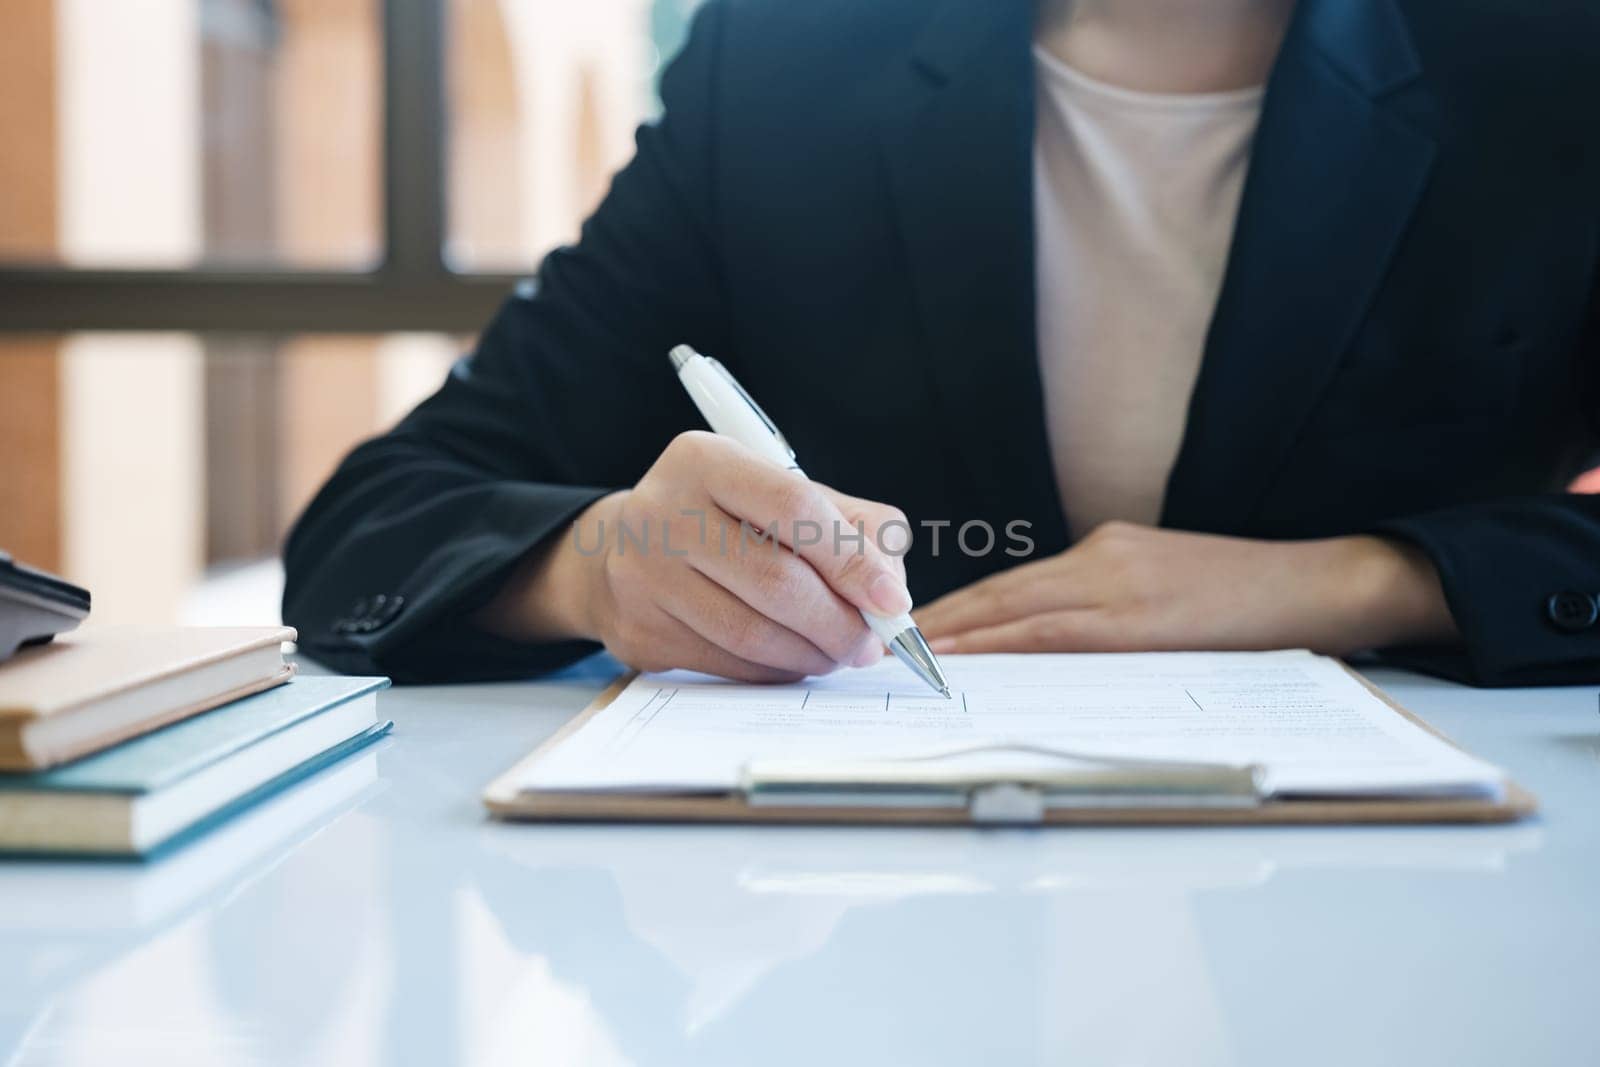 A woman in a suit is writing with a pen on a piece of paper. Concept of professionalism and focus, as the woman is likely working on a task or document